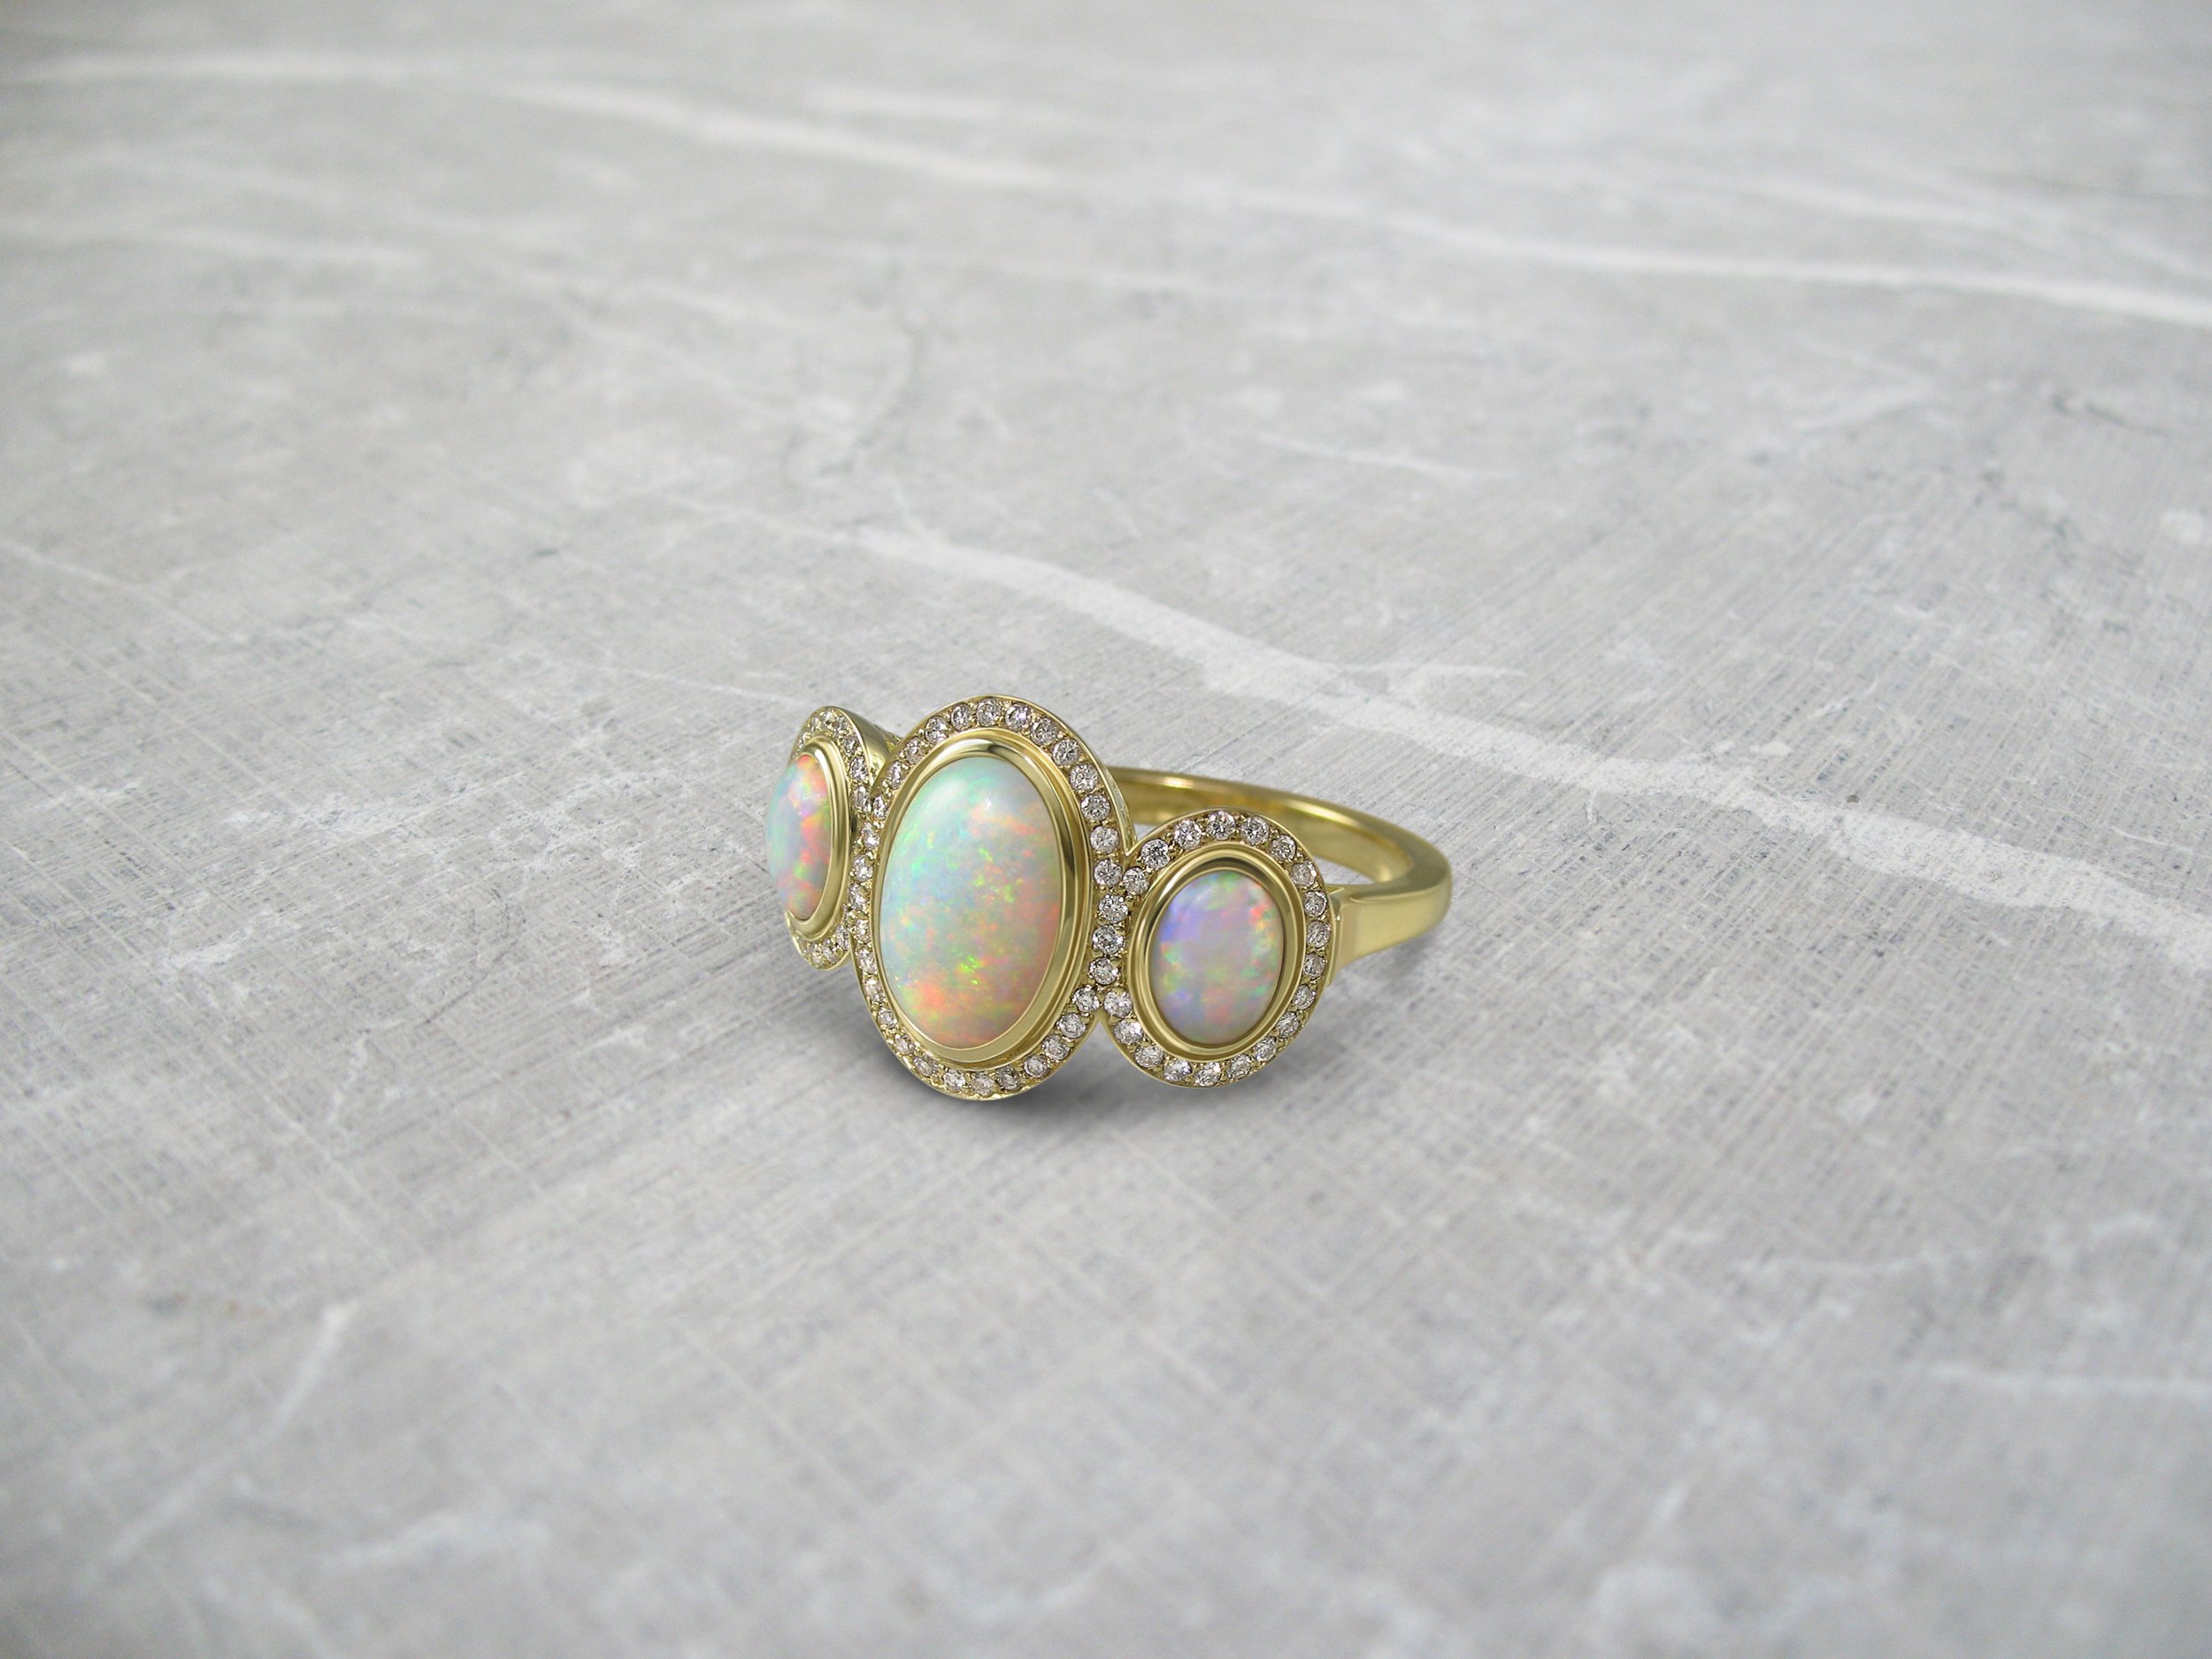 Vintage style opal and diamonds ring yellow gold